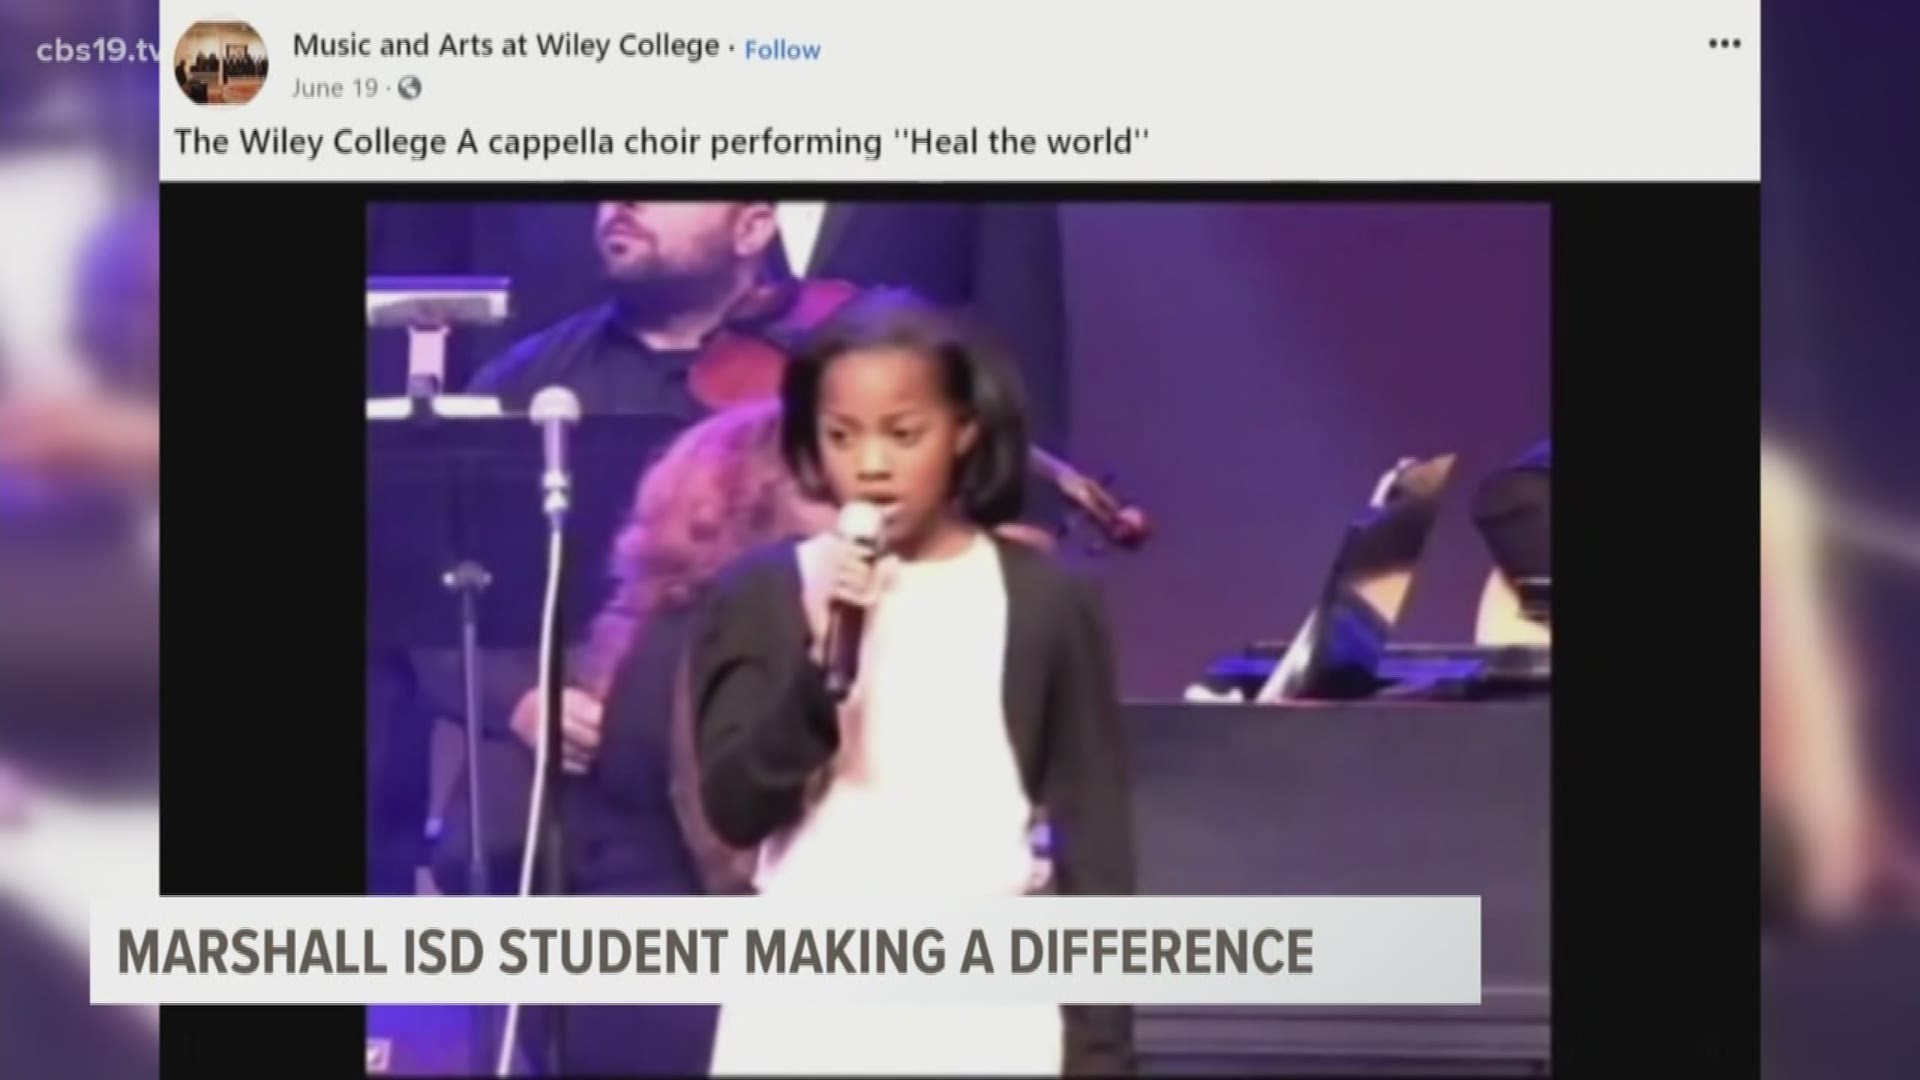 A Marshall ISD student uses her talent to make the world a better place.